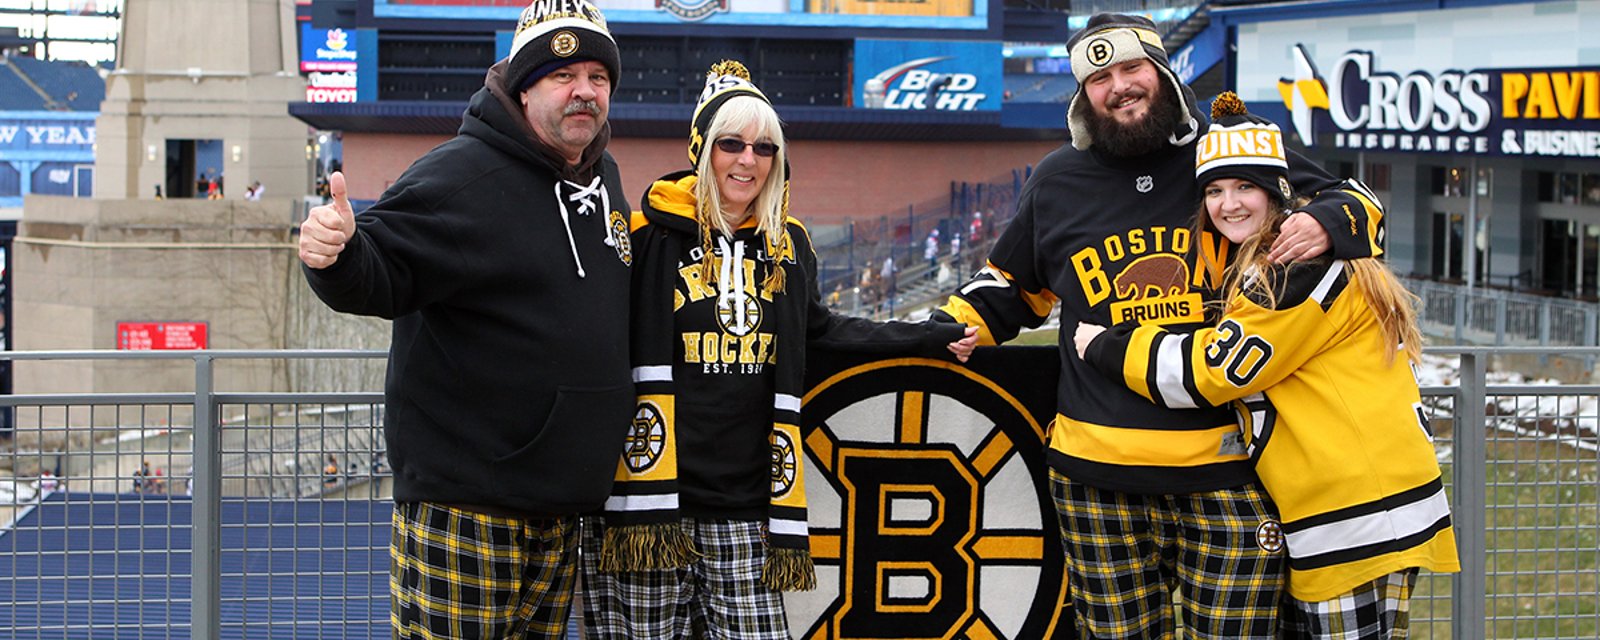 Five things every Bruins fan needs for the playoffs!